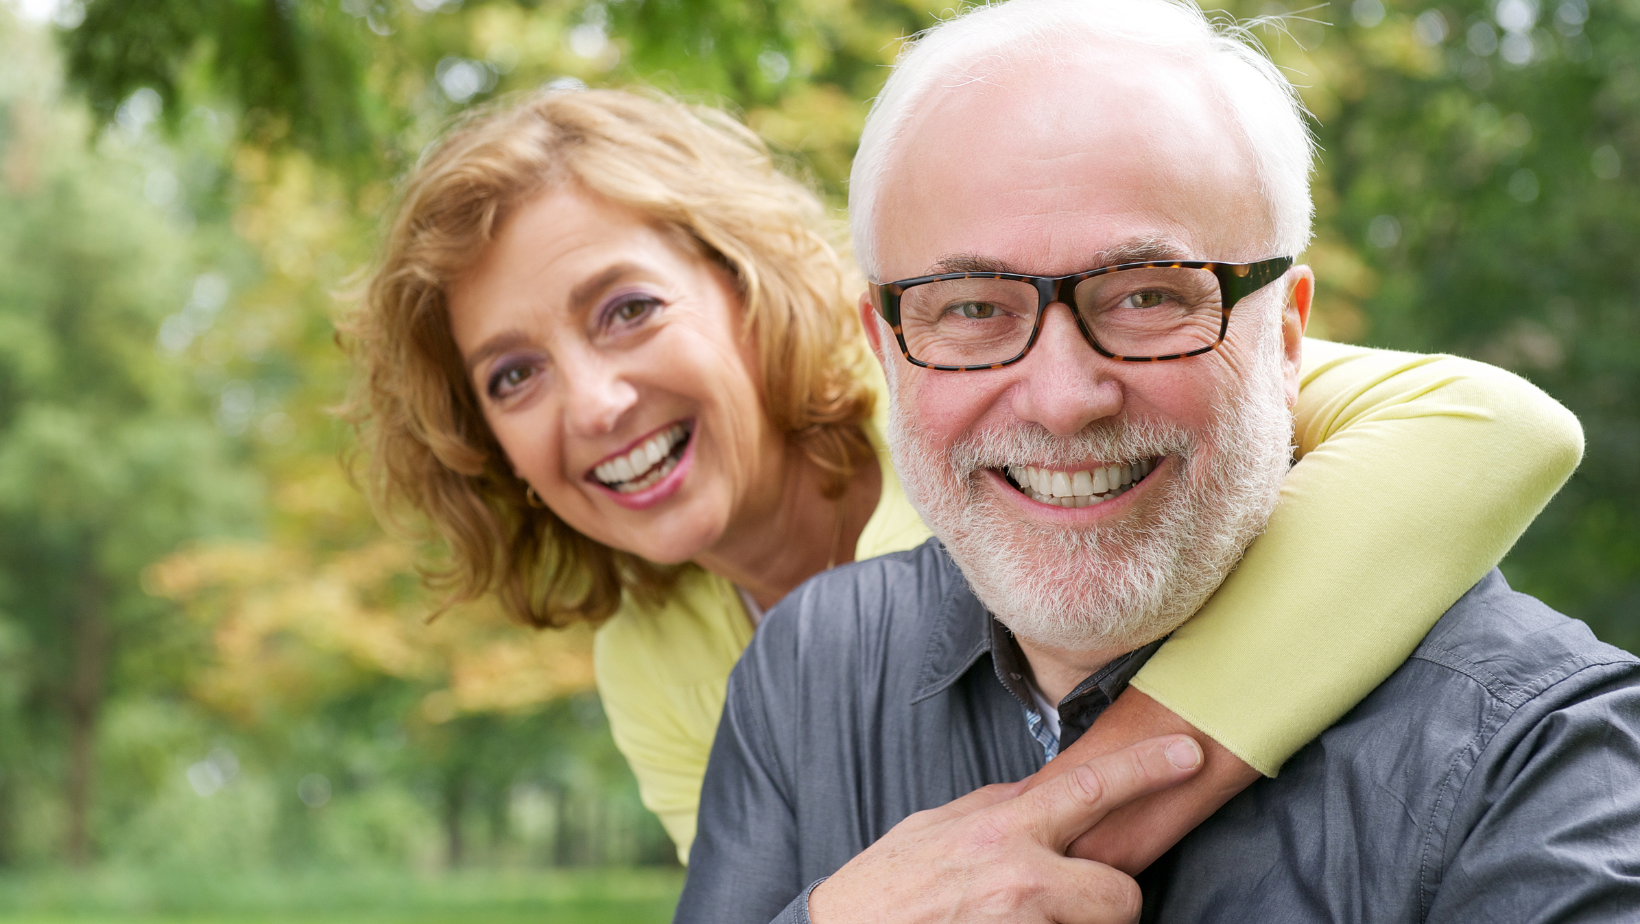 Nearly everyone is a candidate for dental implants to replace their missing teeth